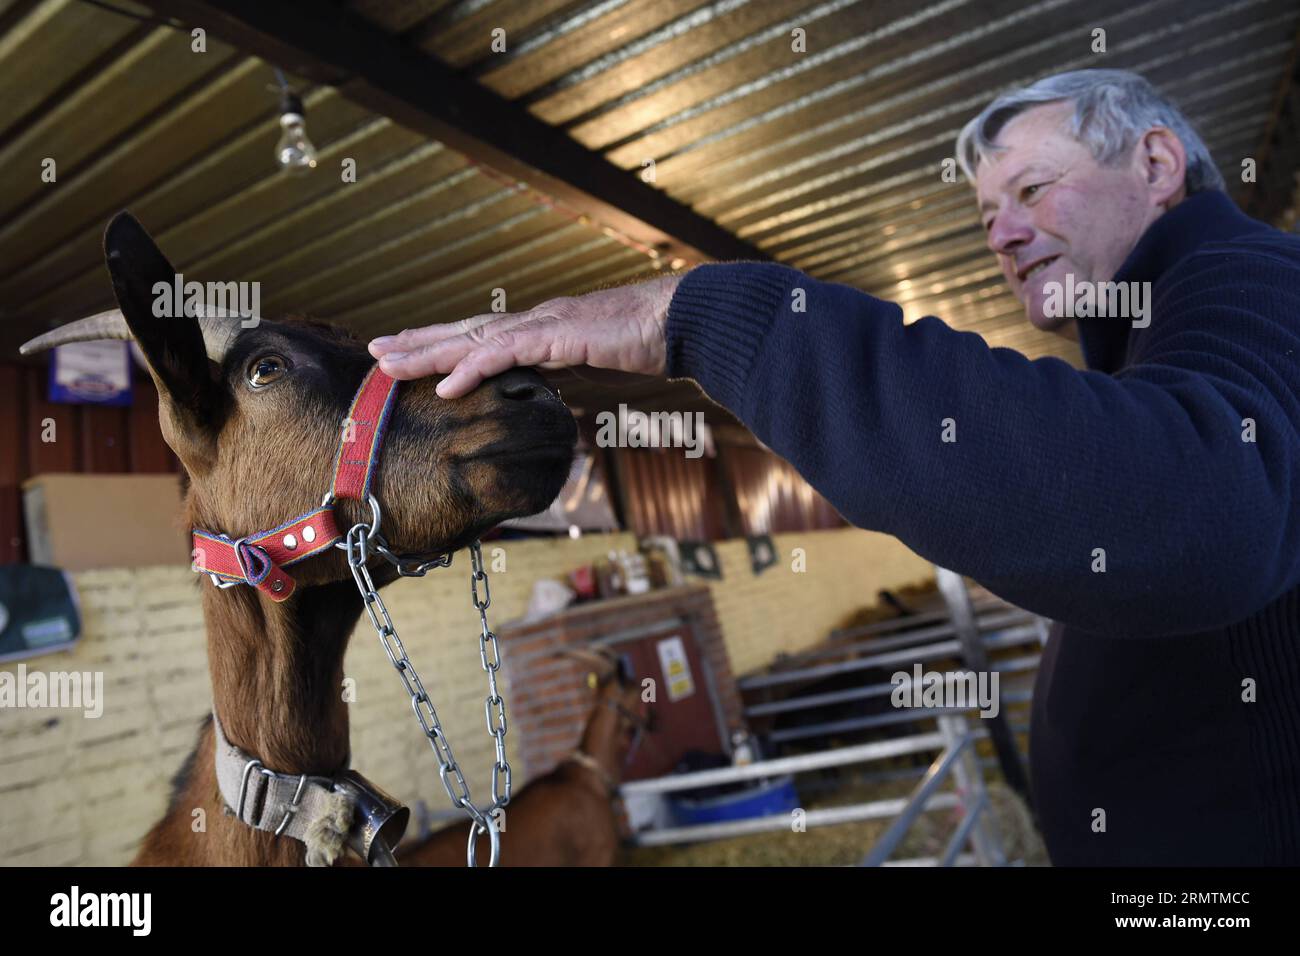 (140910) -- MONTEVIDEO, Sept. 10, 2014 -- A man fondles a goat during the 109th International Exhibition of Livestock and International Agro-Industrial and Commercial Show in Montevideo, capital of Uruguay, on Sept. 10, 2014. The exhibition is held for more than a century and now presents over 2,500 animals this year, according to local press. Nicolas Celaya) URUGUAY-MONTEVIDEO-EXHIBITION e NICOLASxCELAYA PUBLICATIONxNOTxINxCHN   Montevideo Sept 10 2014 a Man  a GOAT during The 109th International Exhibition of Livestock and International Agro Industrial and Commercial Show in Montevideo Capit Stock Photo